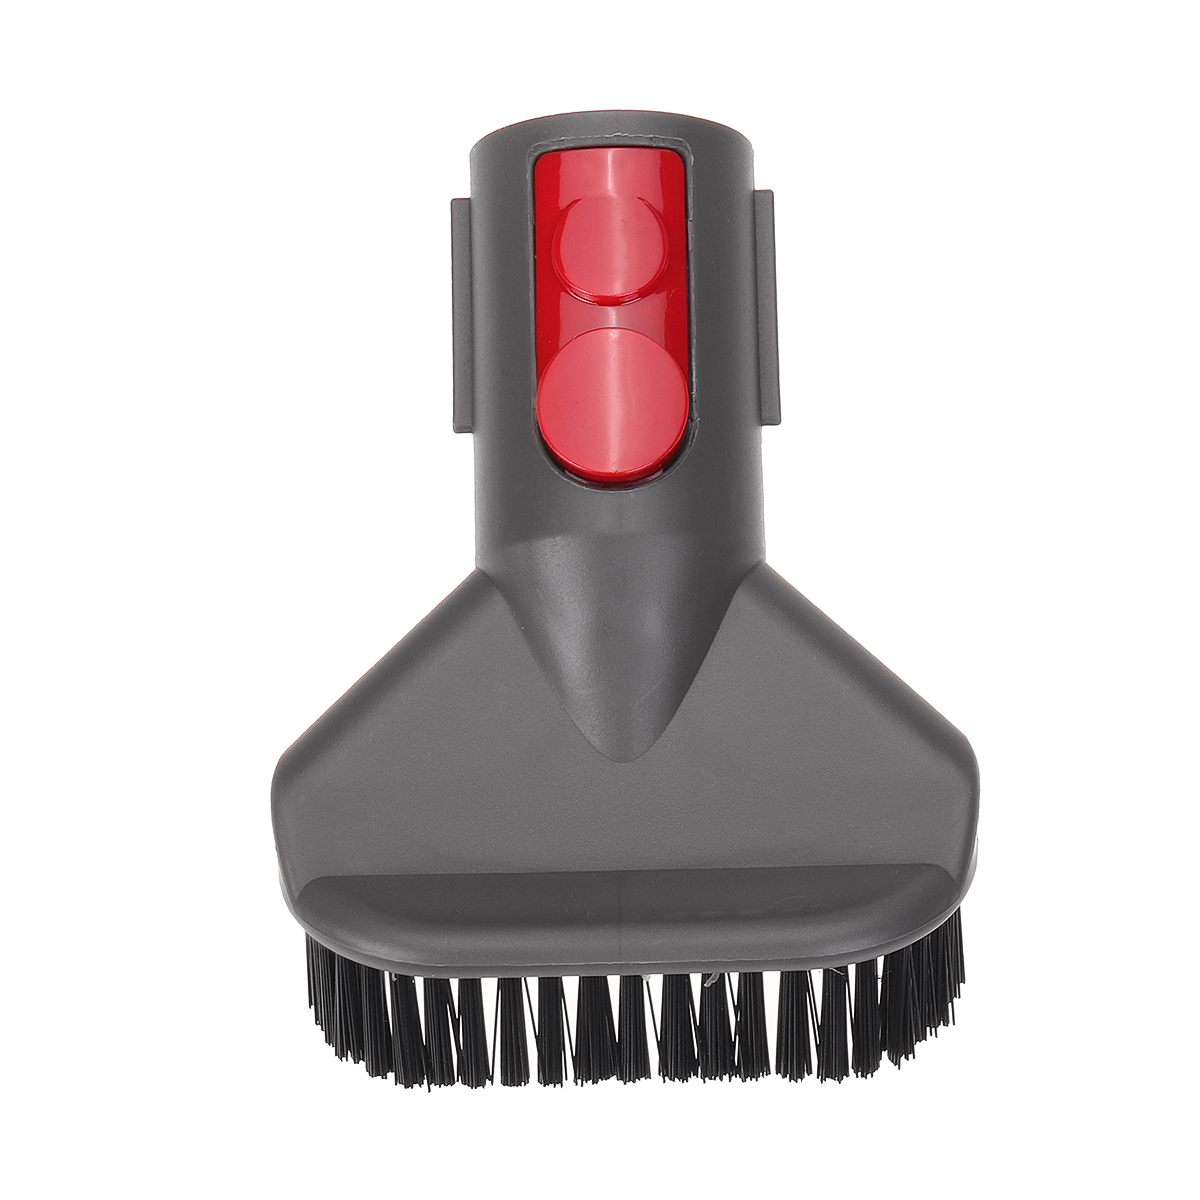 Find 5pcs Replacements for Dyson V7 V8 V10 V11 Vacuum Cleaner Hard Bristle Brush 2 Round Brush 1 Brush Head 2 Not original for Sale on Gipsybee.com with cryptocurrencies